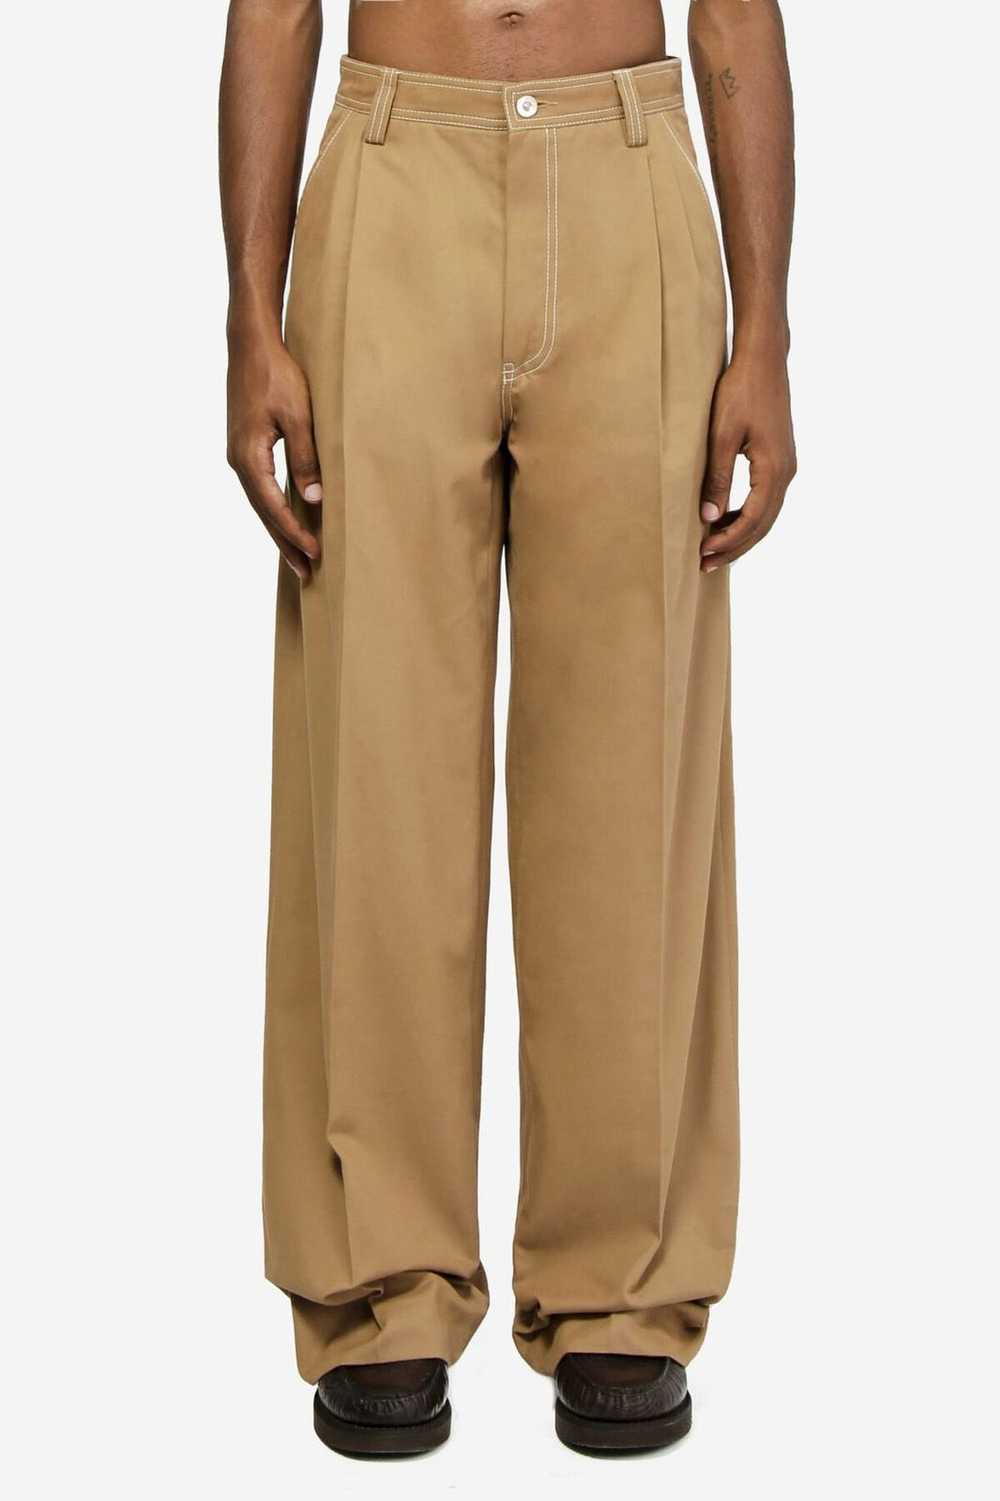 Wales Bonner AW21 London Trousers - image 2